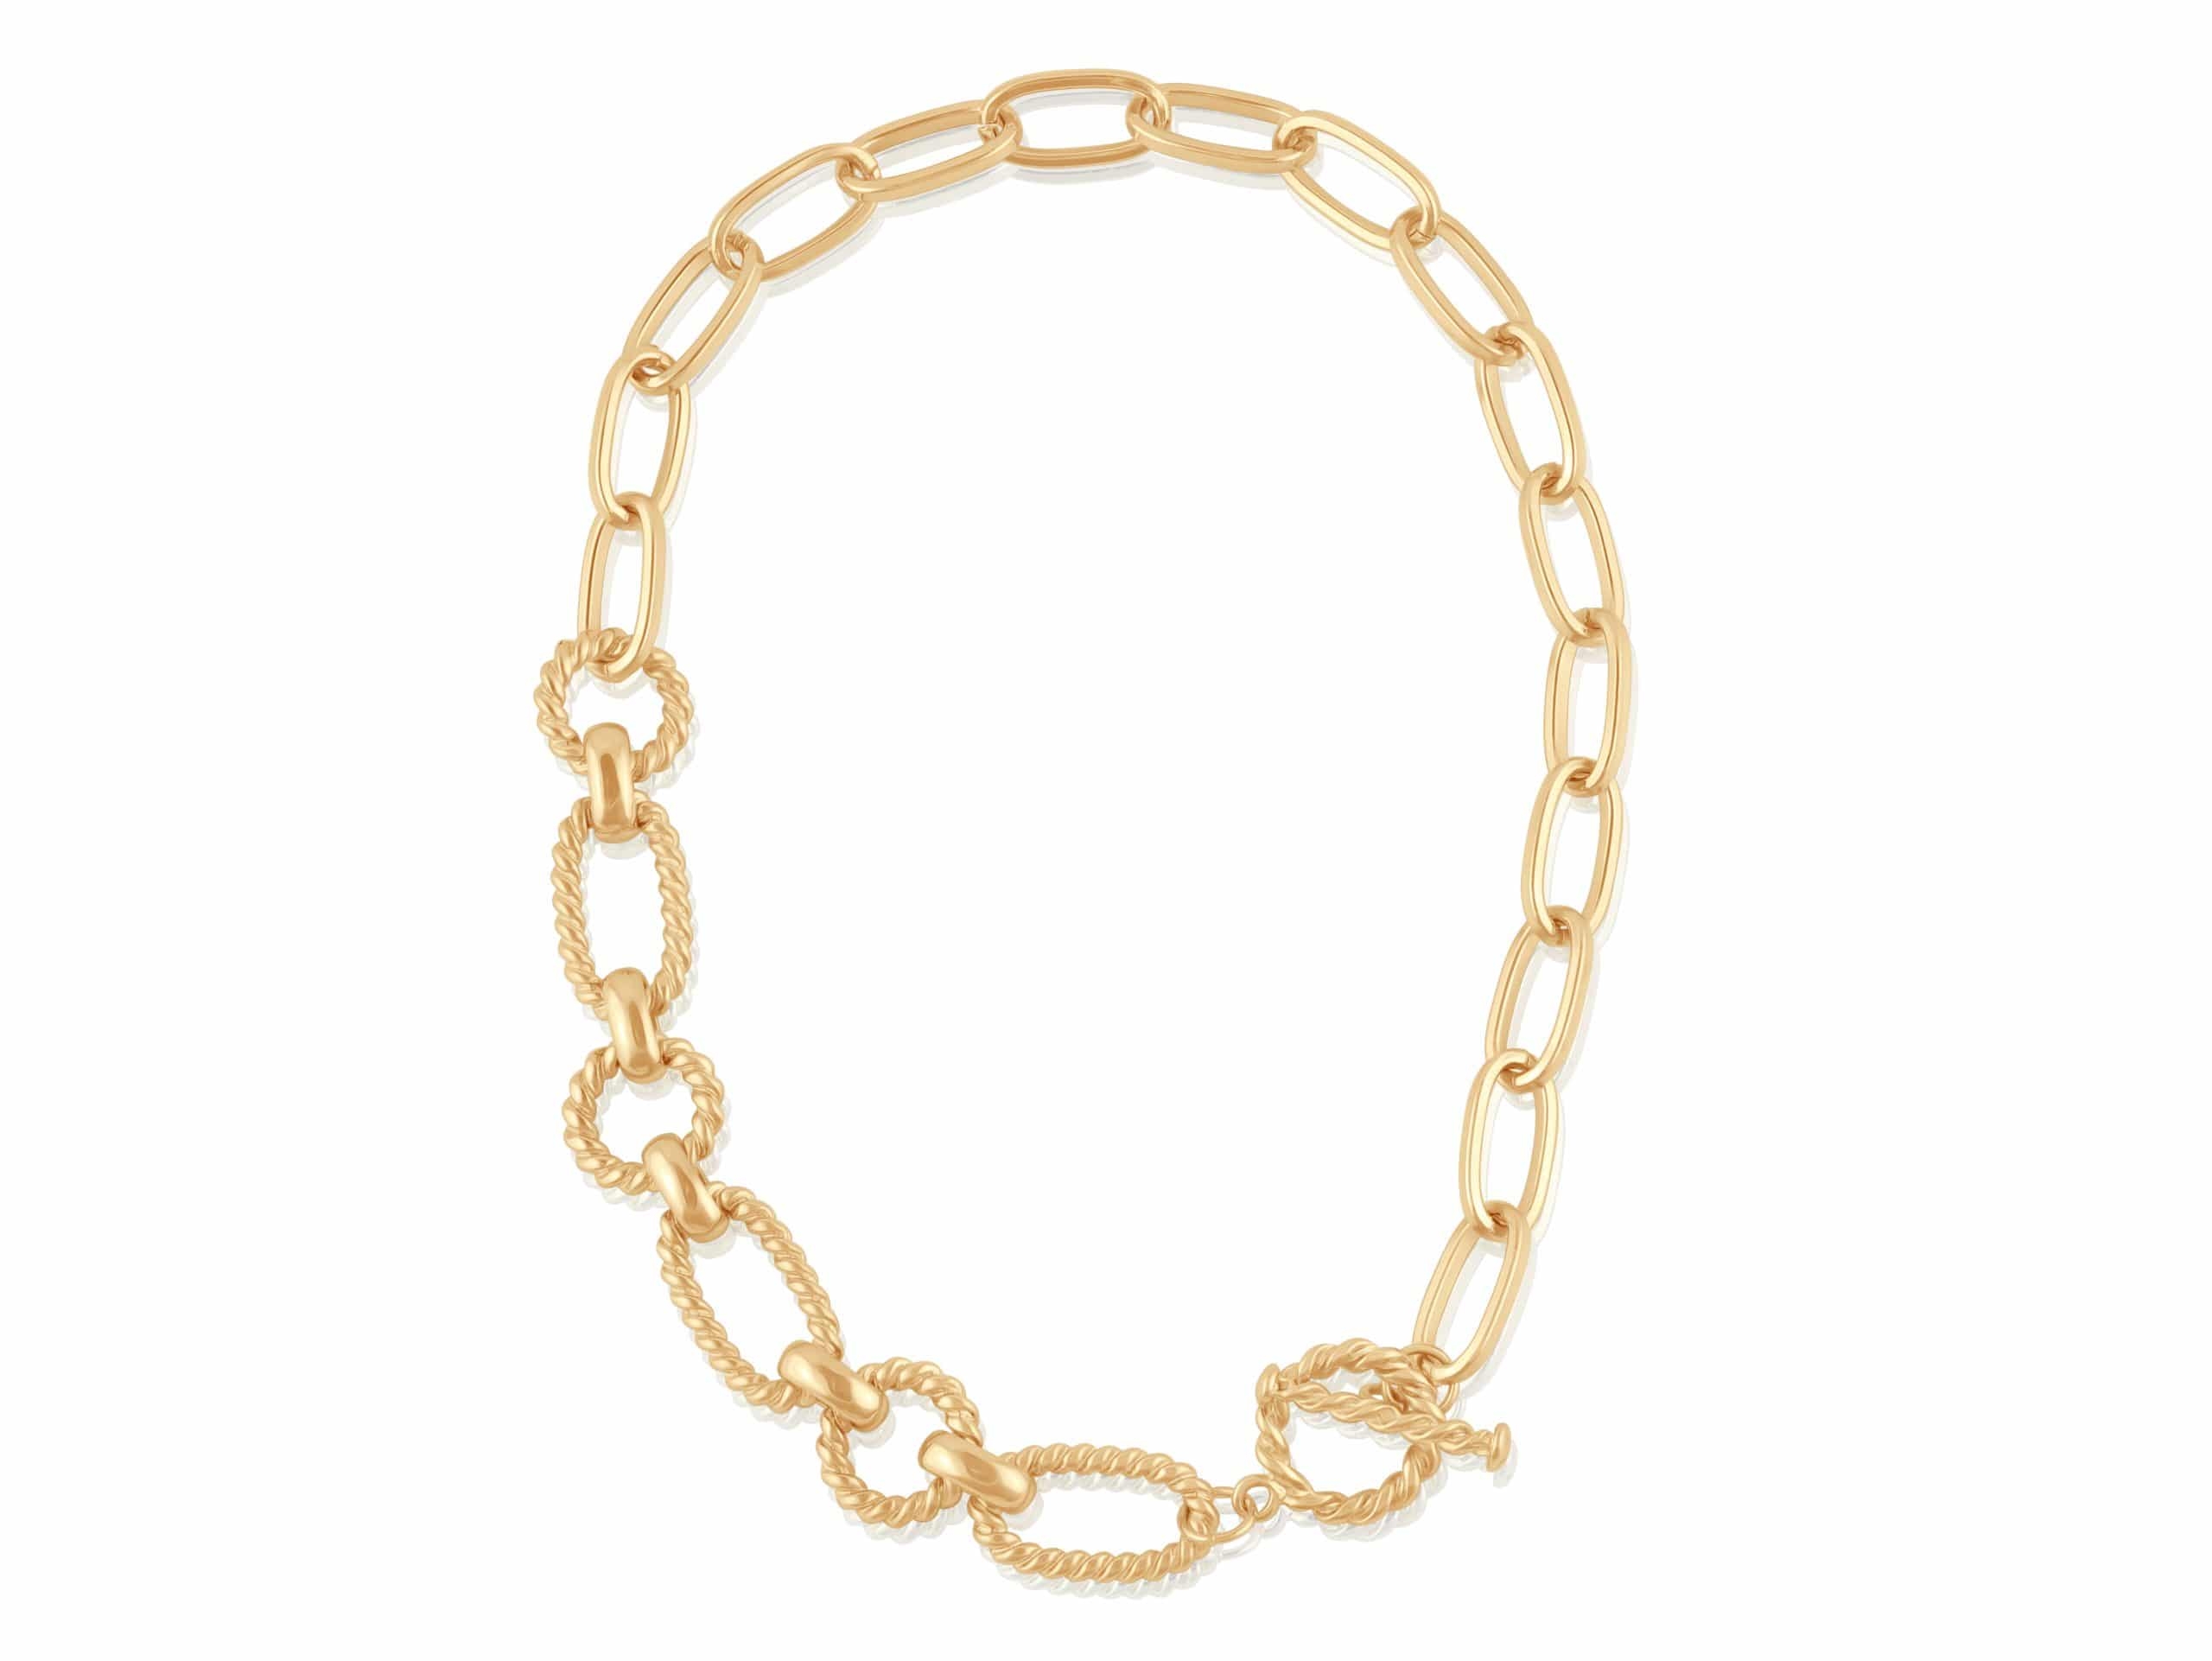 Rachel Statement Chunky Chain Necklace in Gold – Big Metal London